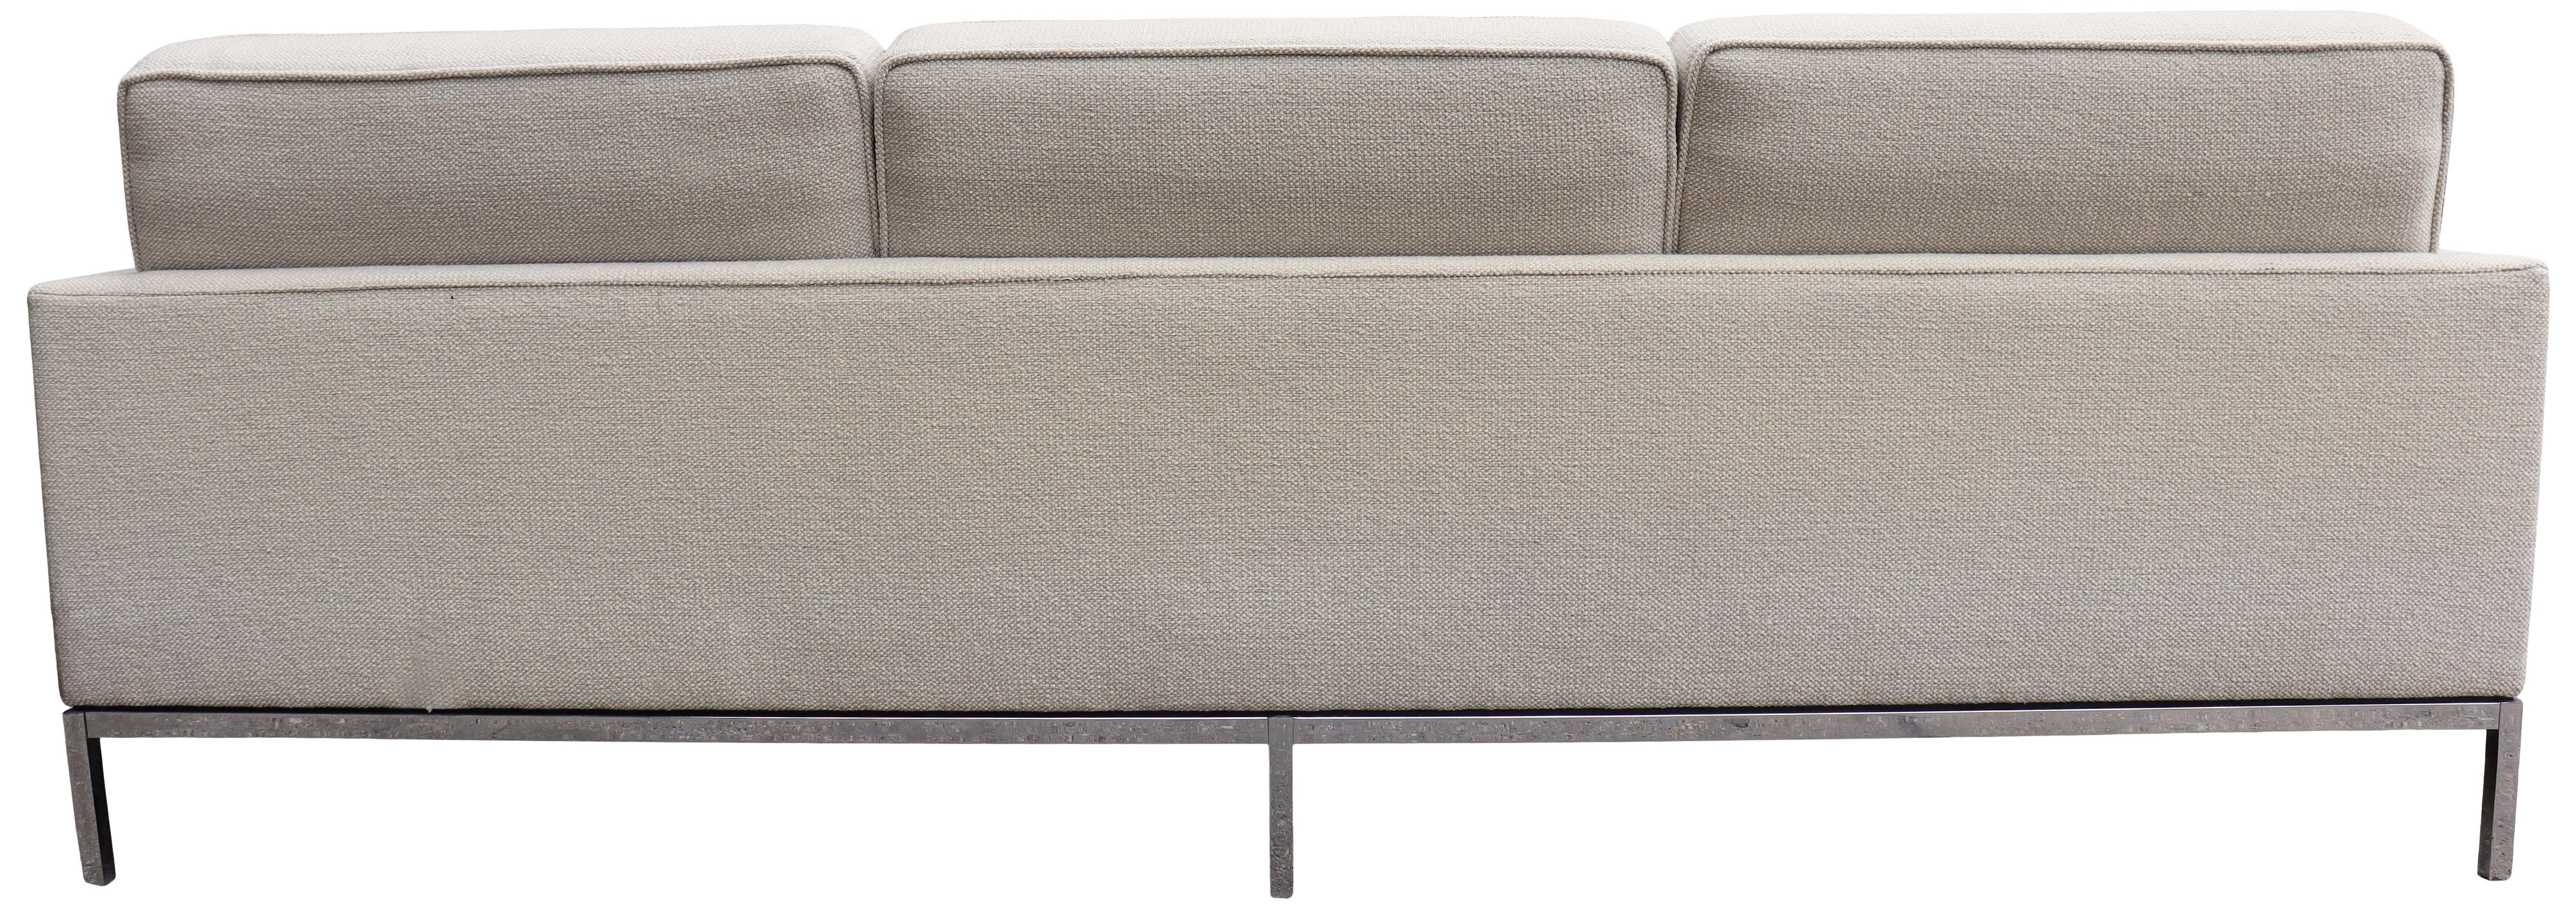 Mid-20th Century Florence Knoll for Knoll Midcentury Sofa